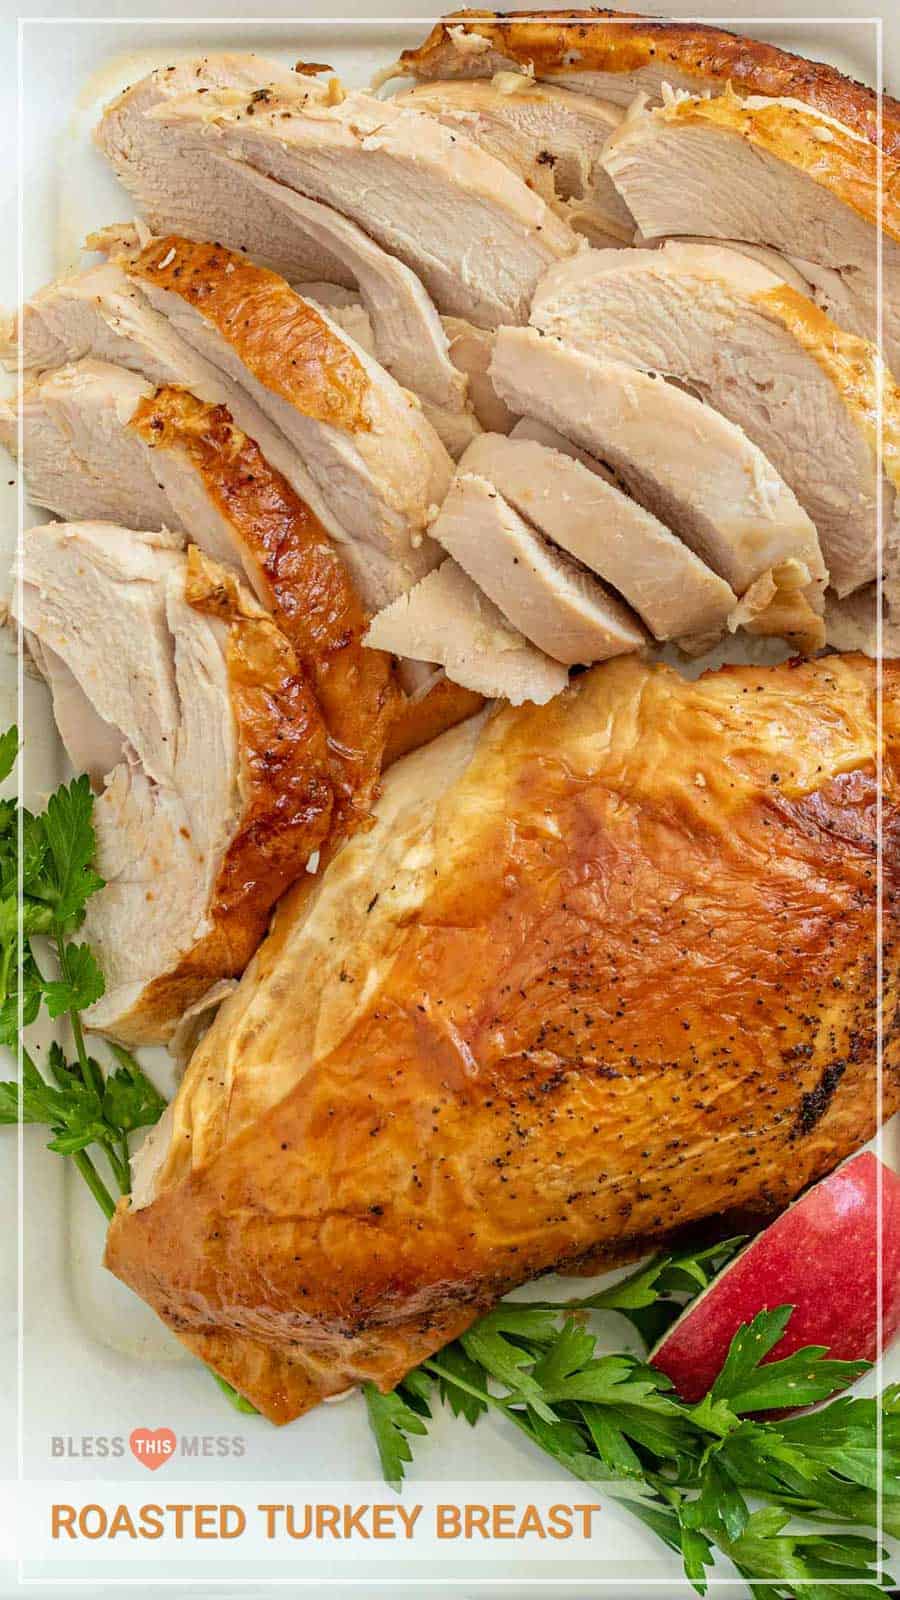 This recipe for roast turkey breast is the perfect simple roasted turkey for a holiday entree that you can easily prep no matter how much cooking or hosting experience you have! It comes out juicy and buttery with a crispy skin every time. Whether you've hosted 20 Thanksgivings or this is your first holiday at your home, you'll love this simple roasted turkey breast recipe that has insanely good flavor and juicy, tender texture. #roastedturkey #turkey #turkeybreast #thanksgivingrecipes